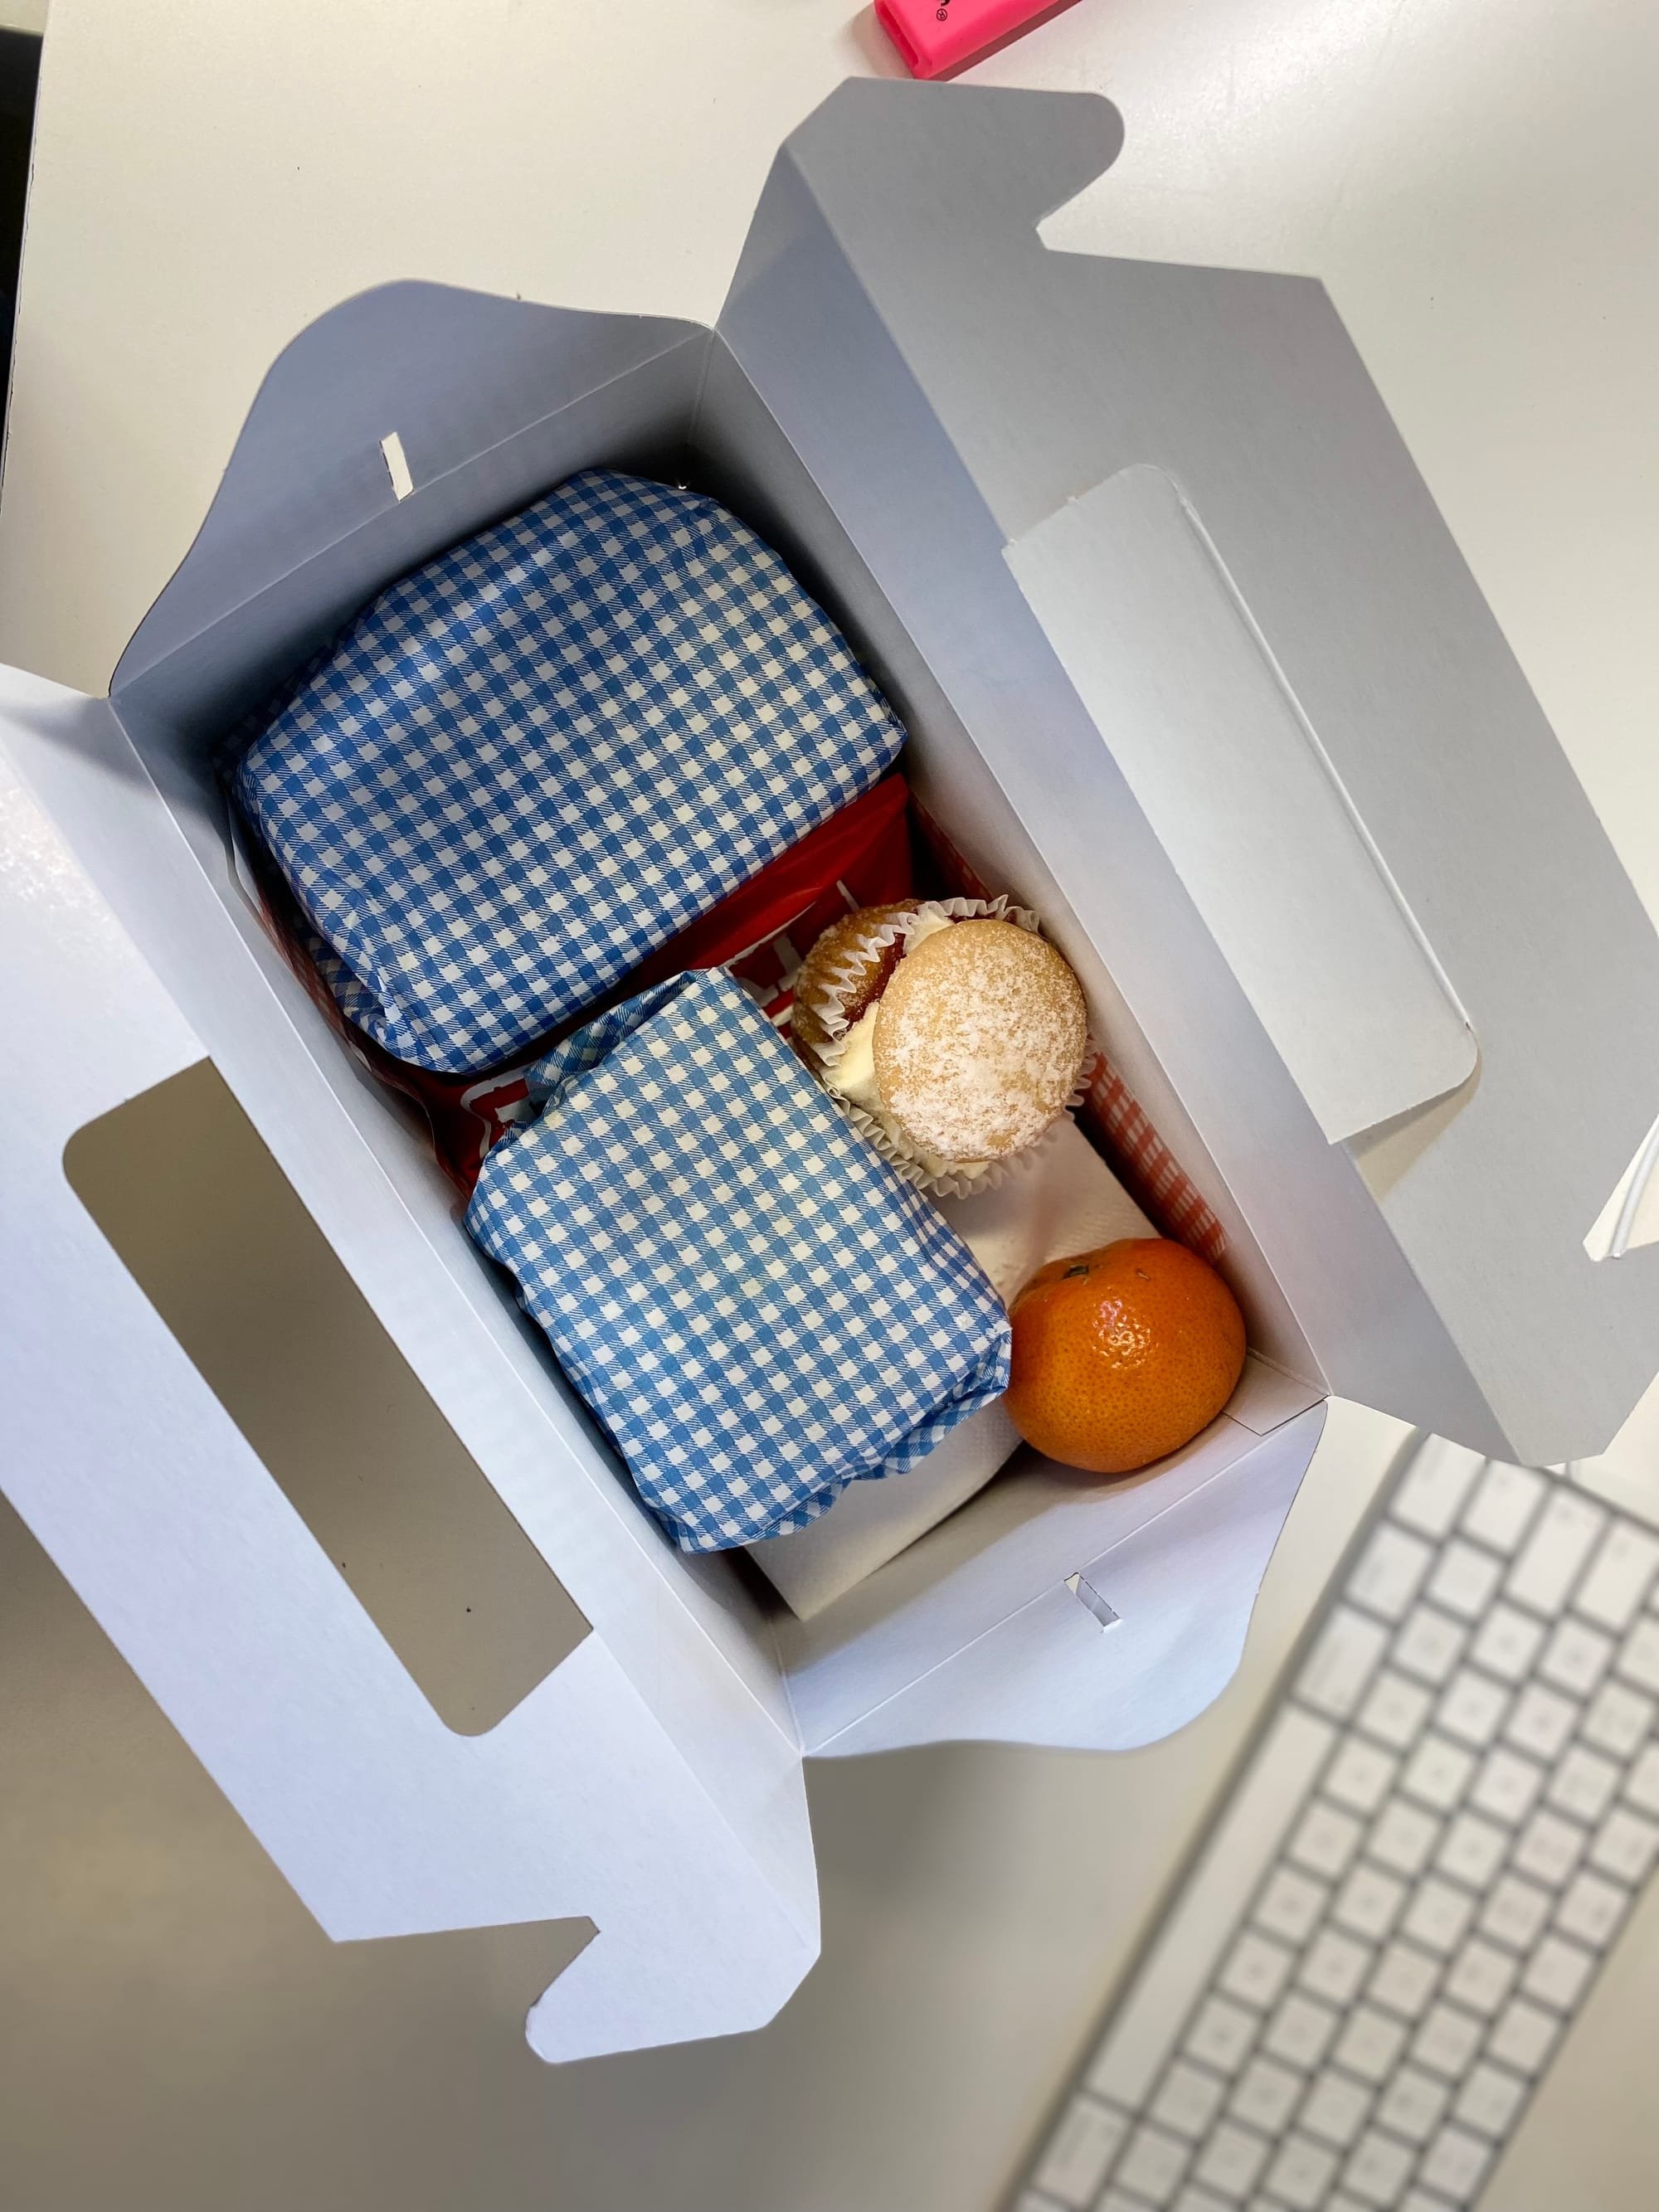 Office working boxed lunch - office catering Birmingham